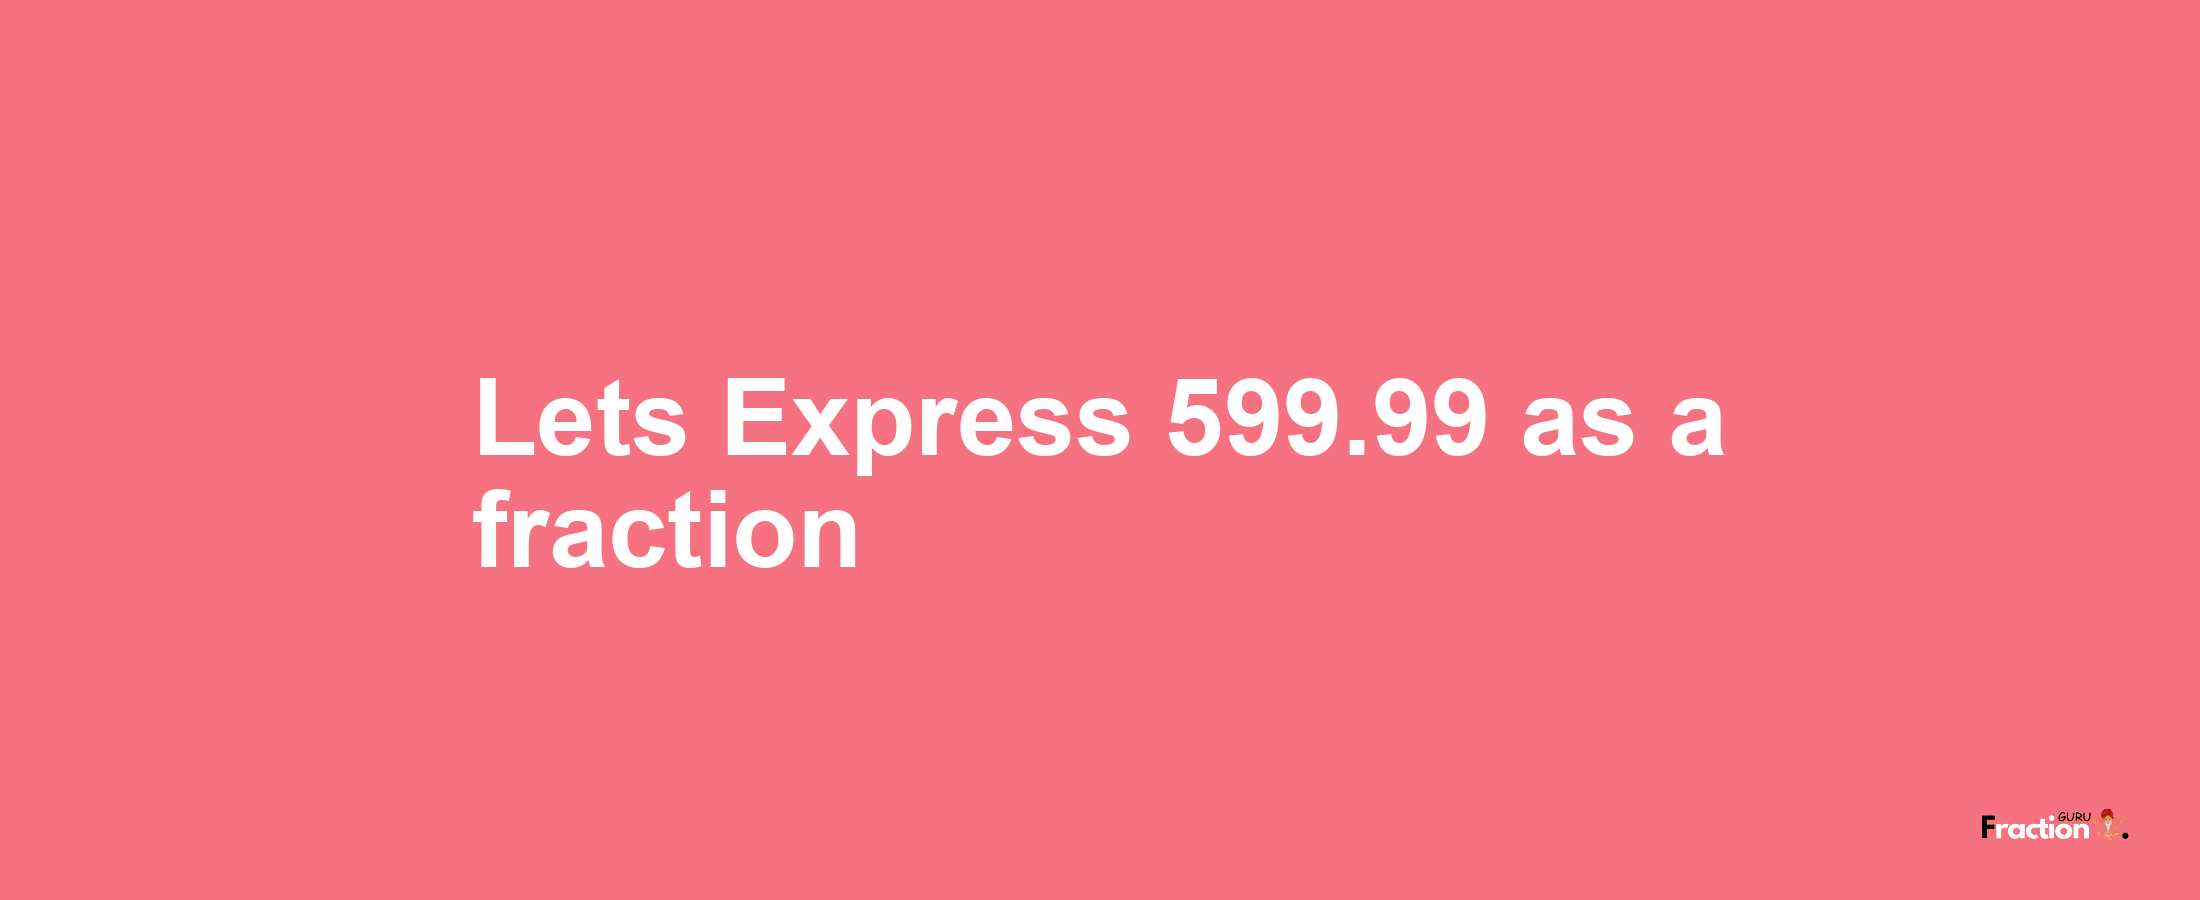 Lets Express 599.99 as afraction